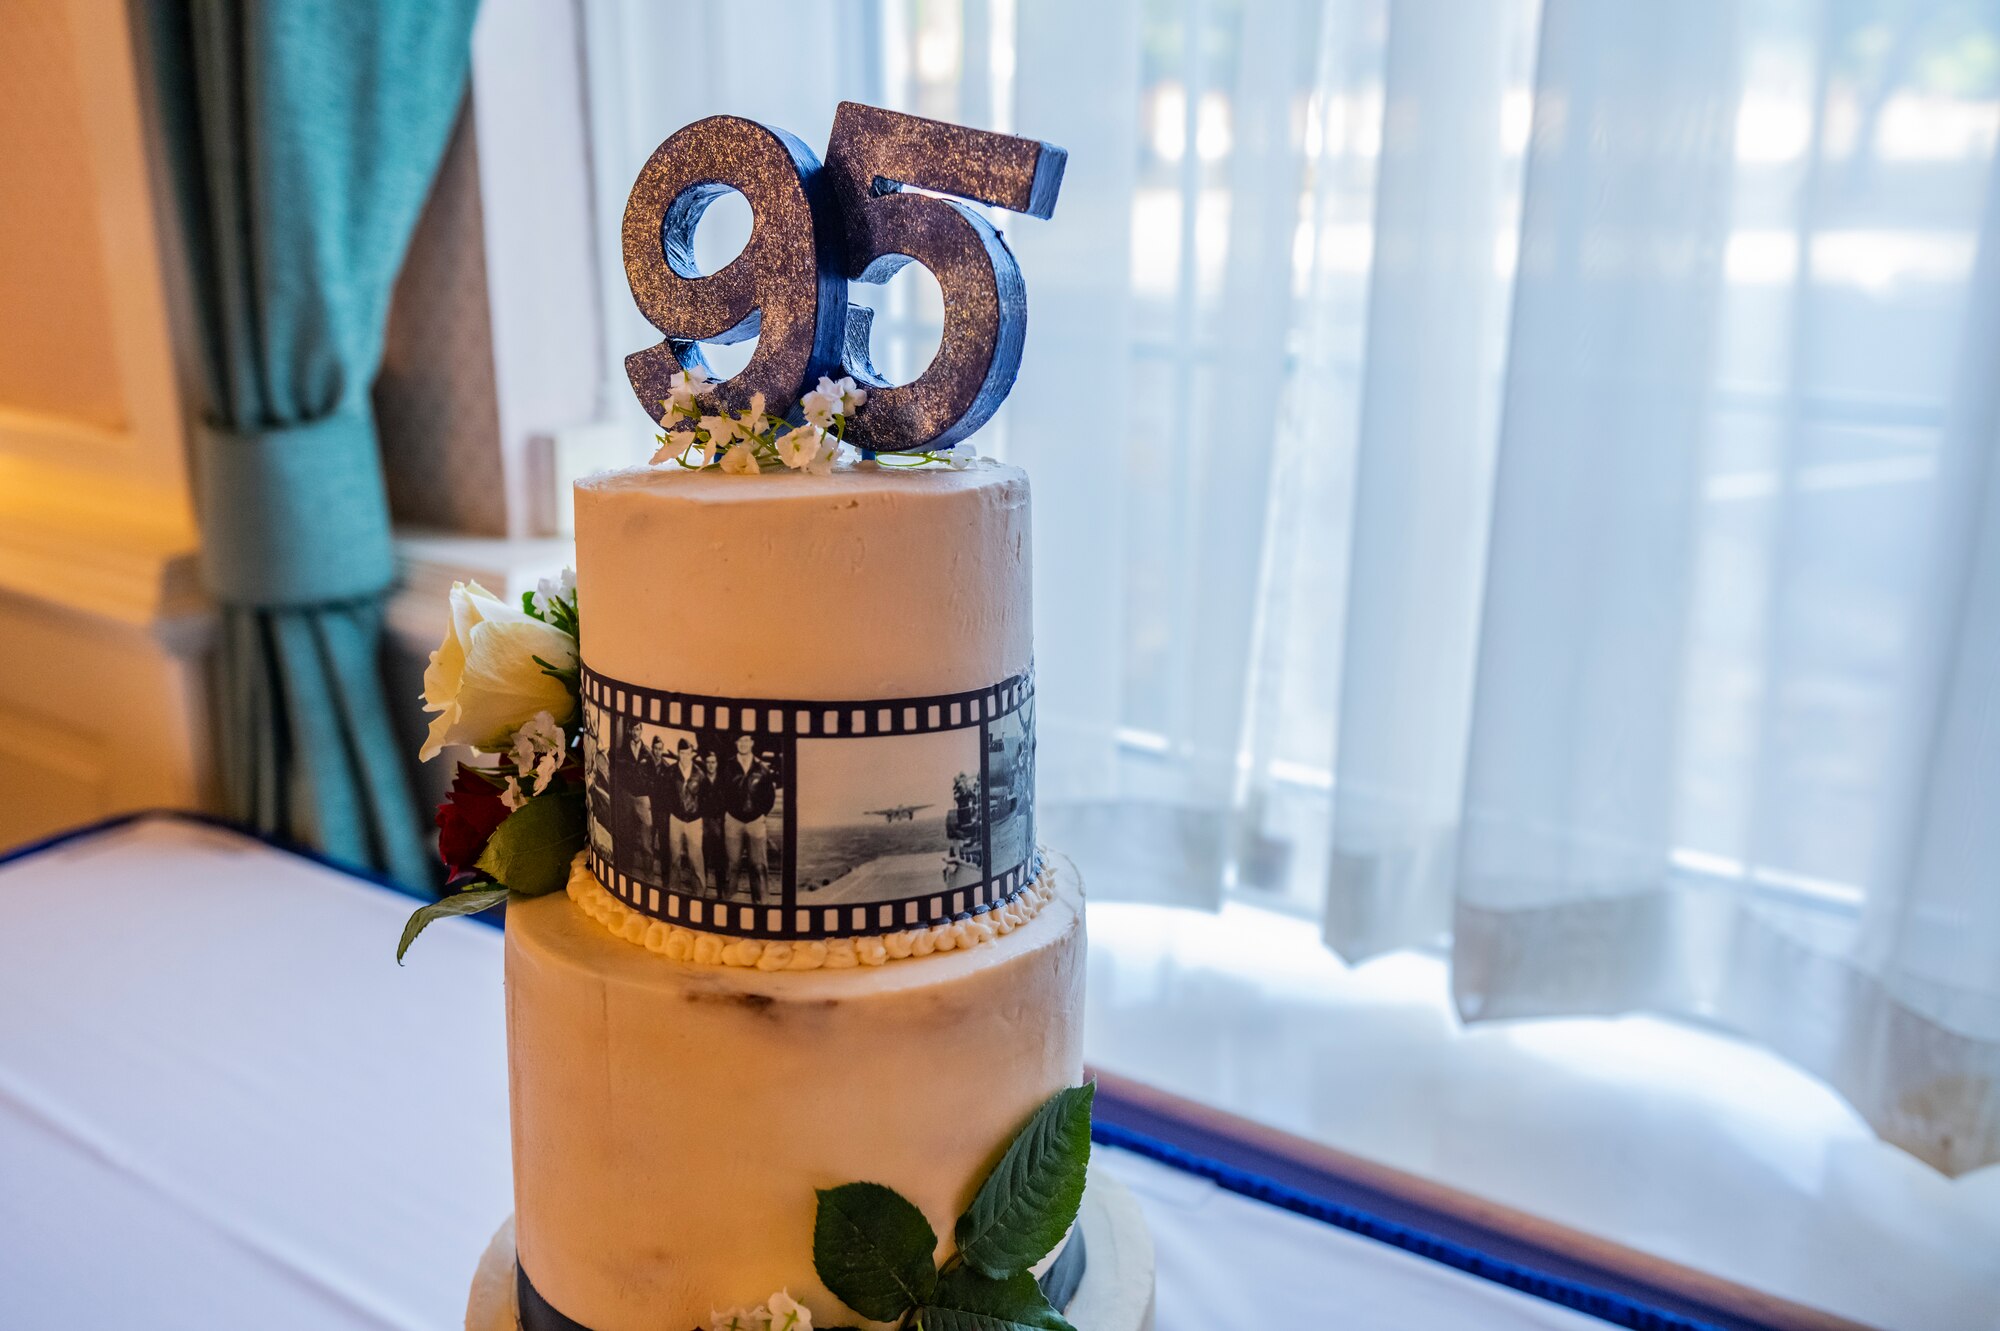 A cake featuring historical imagery sits on display at the 95th Reconnaissance Squadron’s 105th anniversary celebration at Royal Air Force Mildenhall, England, Aug. 19, 2022. The 95th RS was first activated as the 95th Aero Squadron on Aug. 20, 1917, at Kelly Field, Texas, and has subsequently held a variety of mission sets through nearly every major conflict to date.